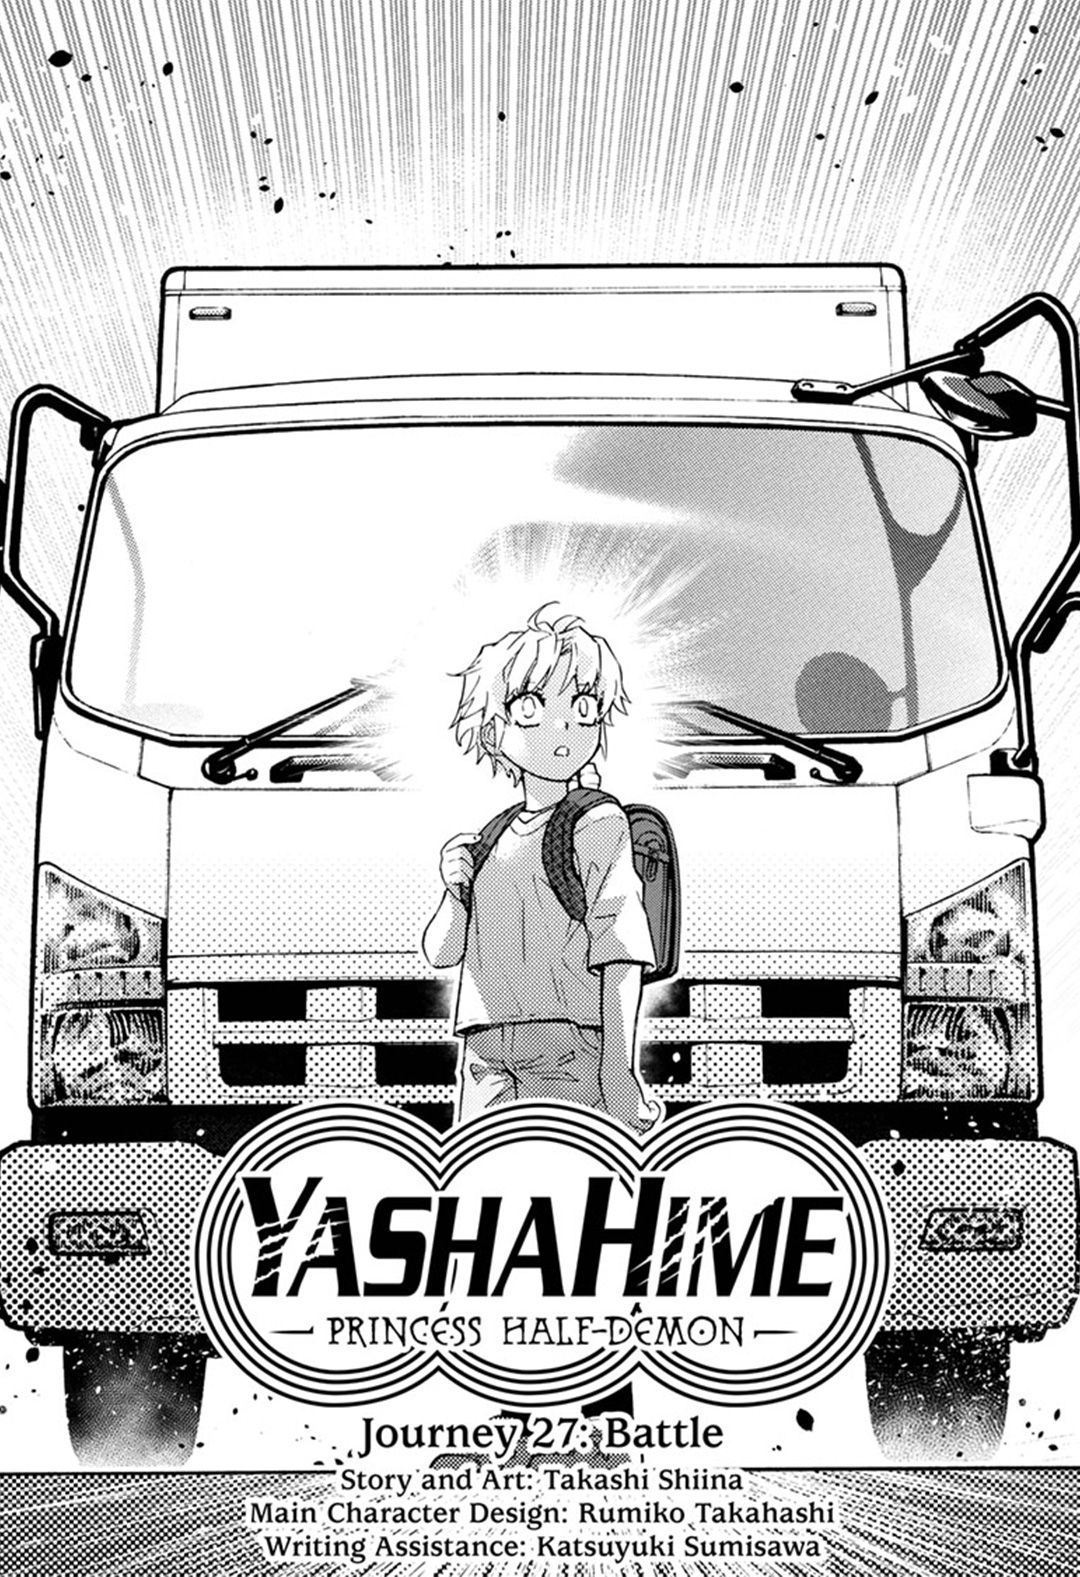 yashahime manga 🖤🤍 on X: 🎊 Today marks the 2nd anniversary since the  release of the Hanyo no Yashahime manga! Tell us your favorite moment so  far 🥳  / X